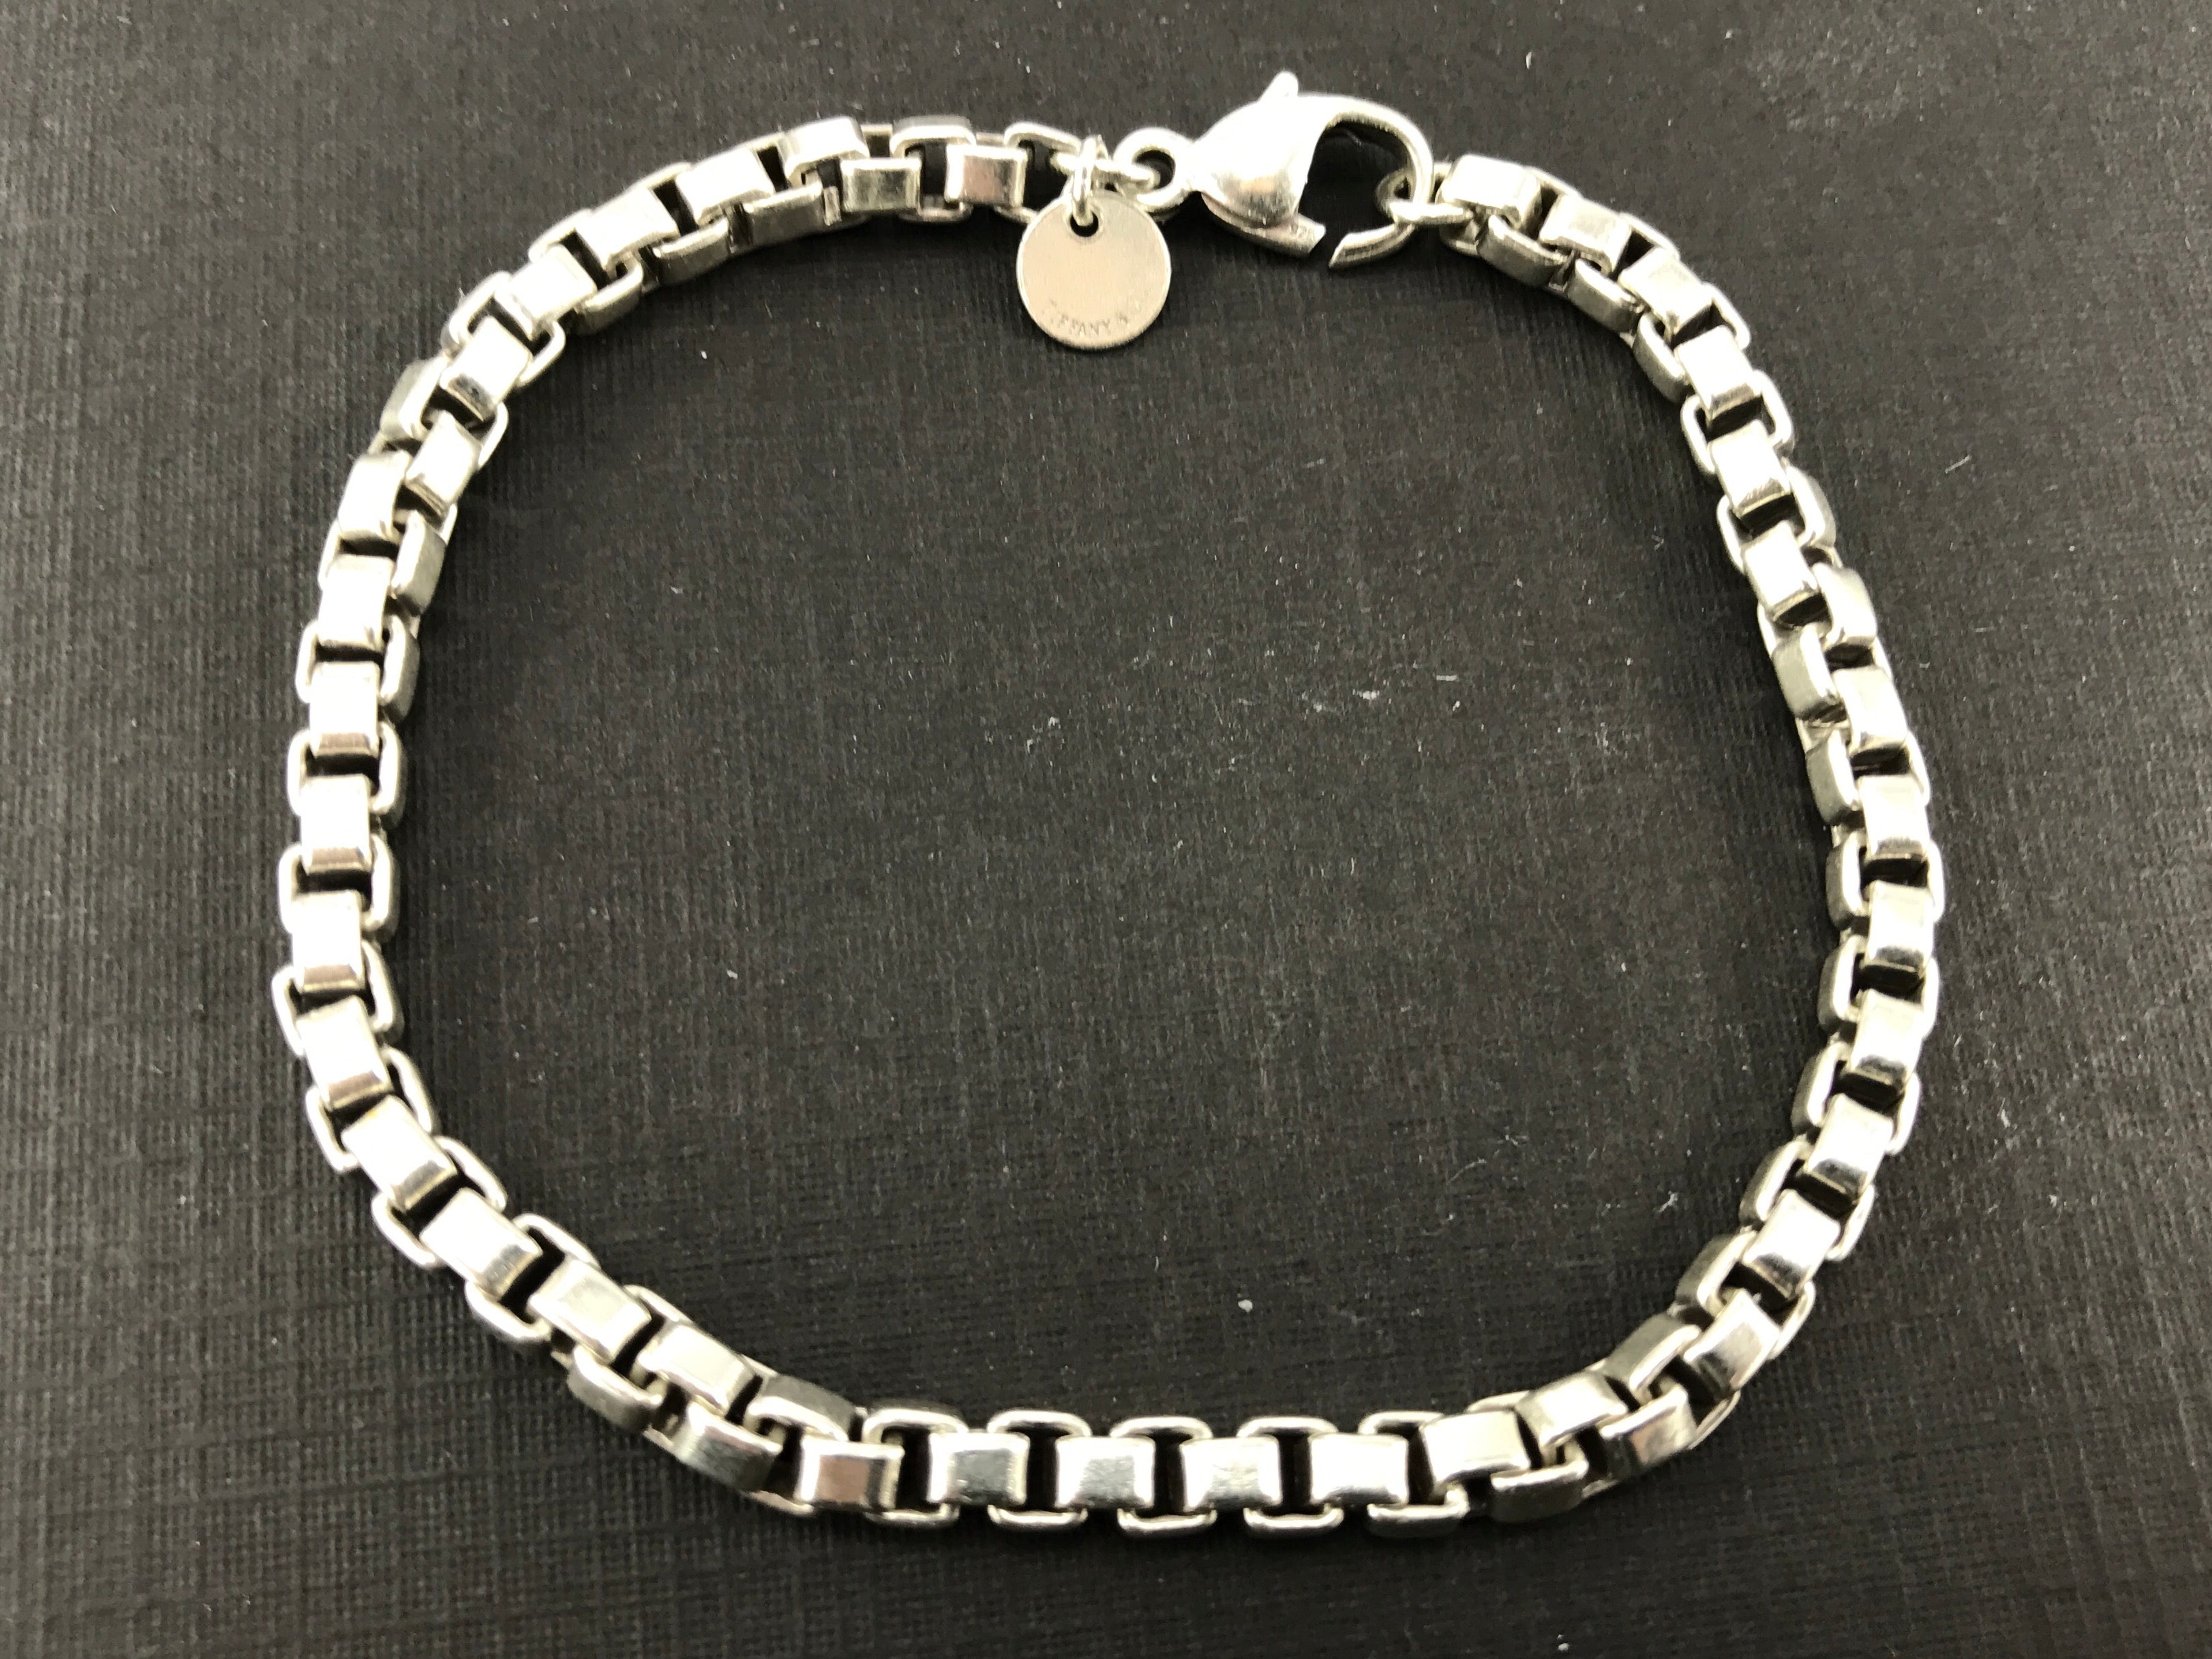 Silver chain link bracelet, hallmarked Tiffany and Co., London 2001, with  abstract heart shaped key